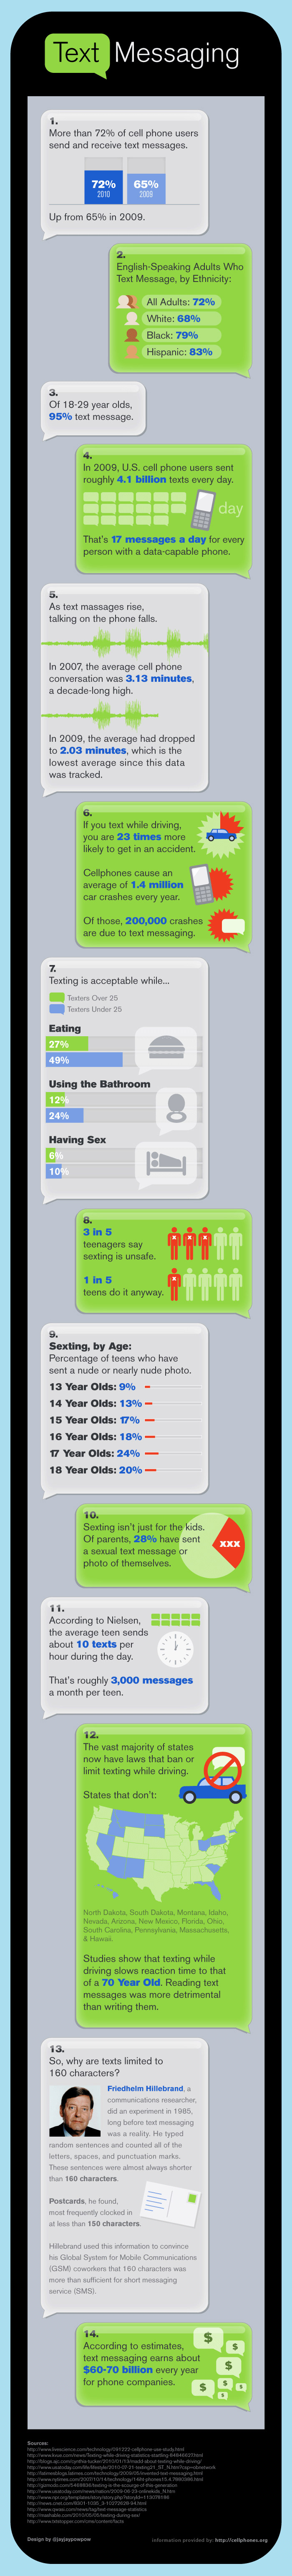 The Facts about Text Messaging